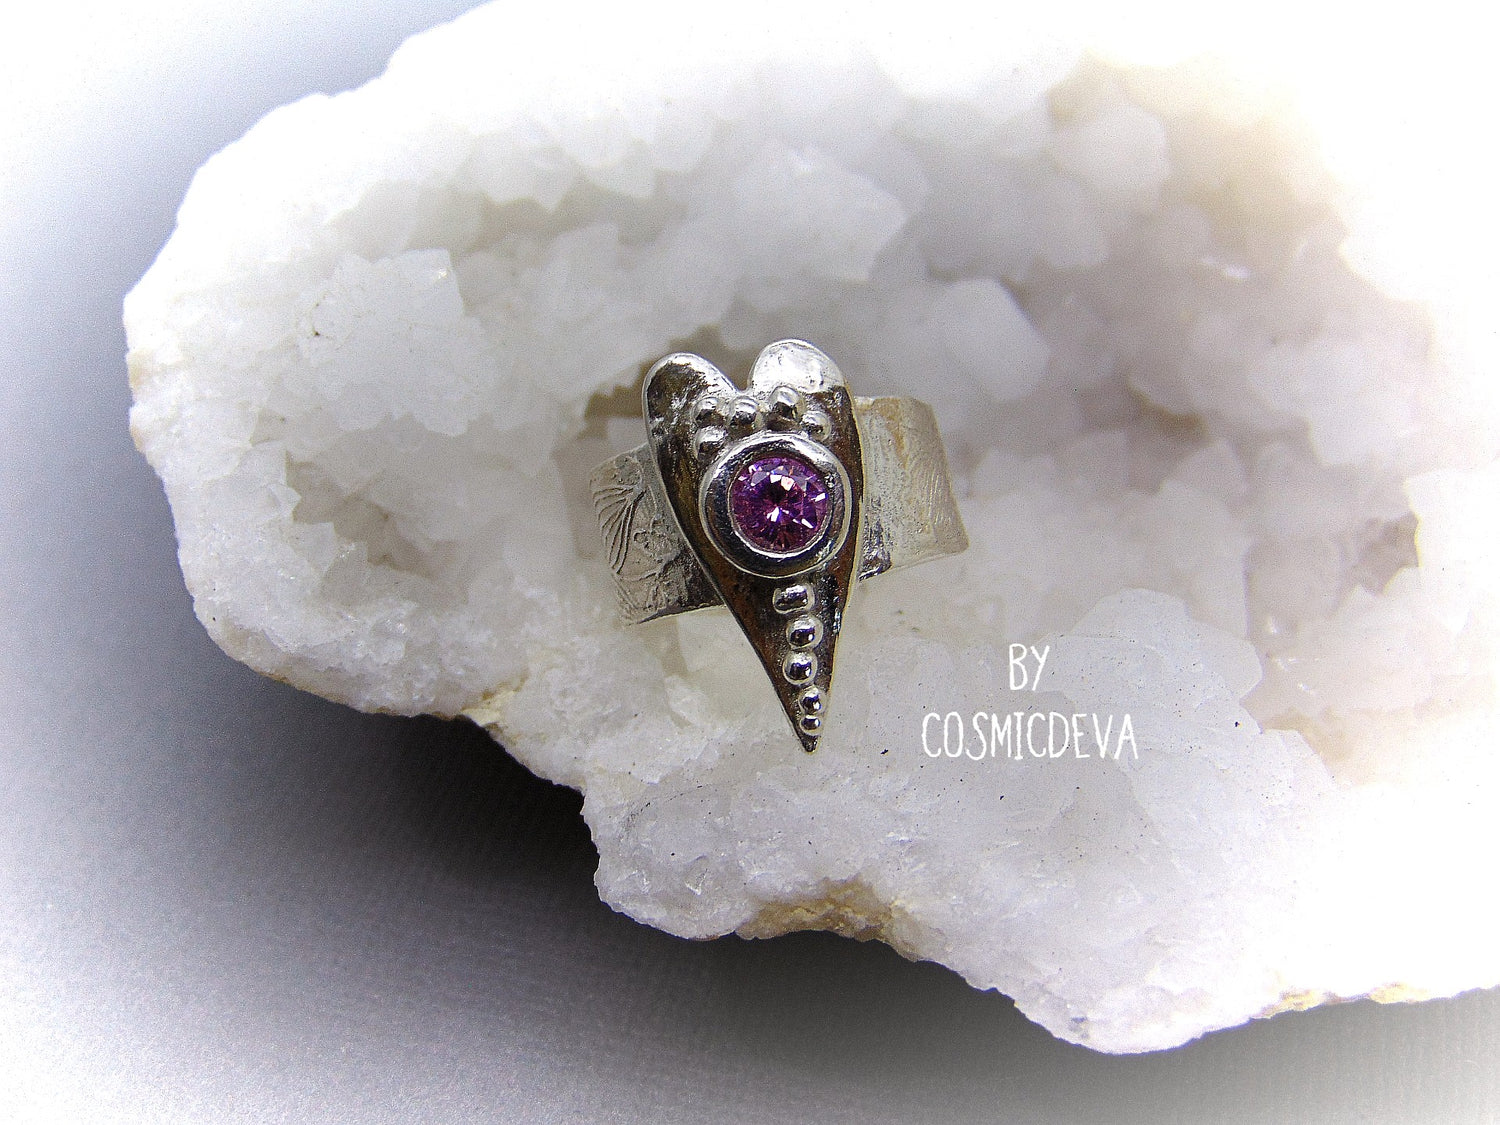 Sterling Silver Heart Ring with Pink CZ Gemstone, Heart Ring, Love Ring, SIZE 8 Engagement Ring , The heart is a symbol of love between two souls. This handcrafted wide ring shank sterling silver ring with floral texture featuring a small heart and a round 5 mm pink CZ gemstone. This Ring is made of pure .950 sterling silver and hallmarked as it- CosmicDeva